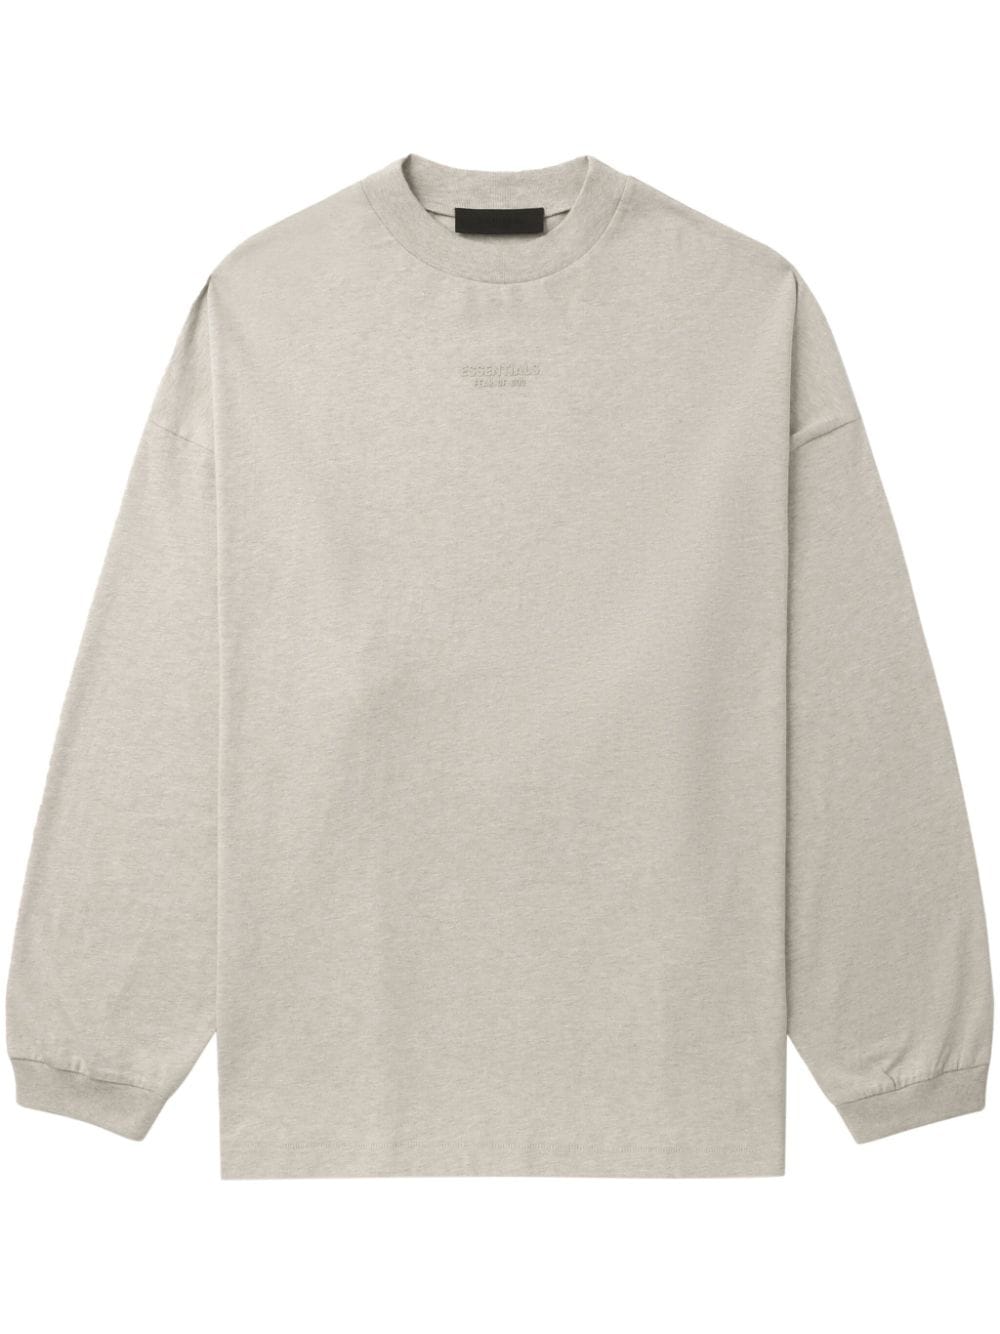 FEAR OF GOD ESSENTIALS logo-embossed jersey sweatshirt - Grey von FEAR OF GOD ESSENTIALS